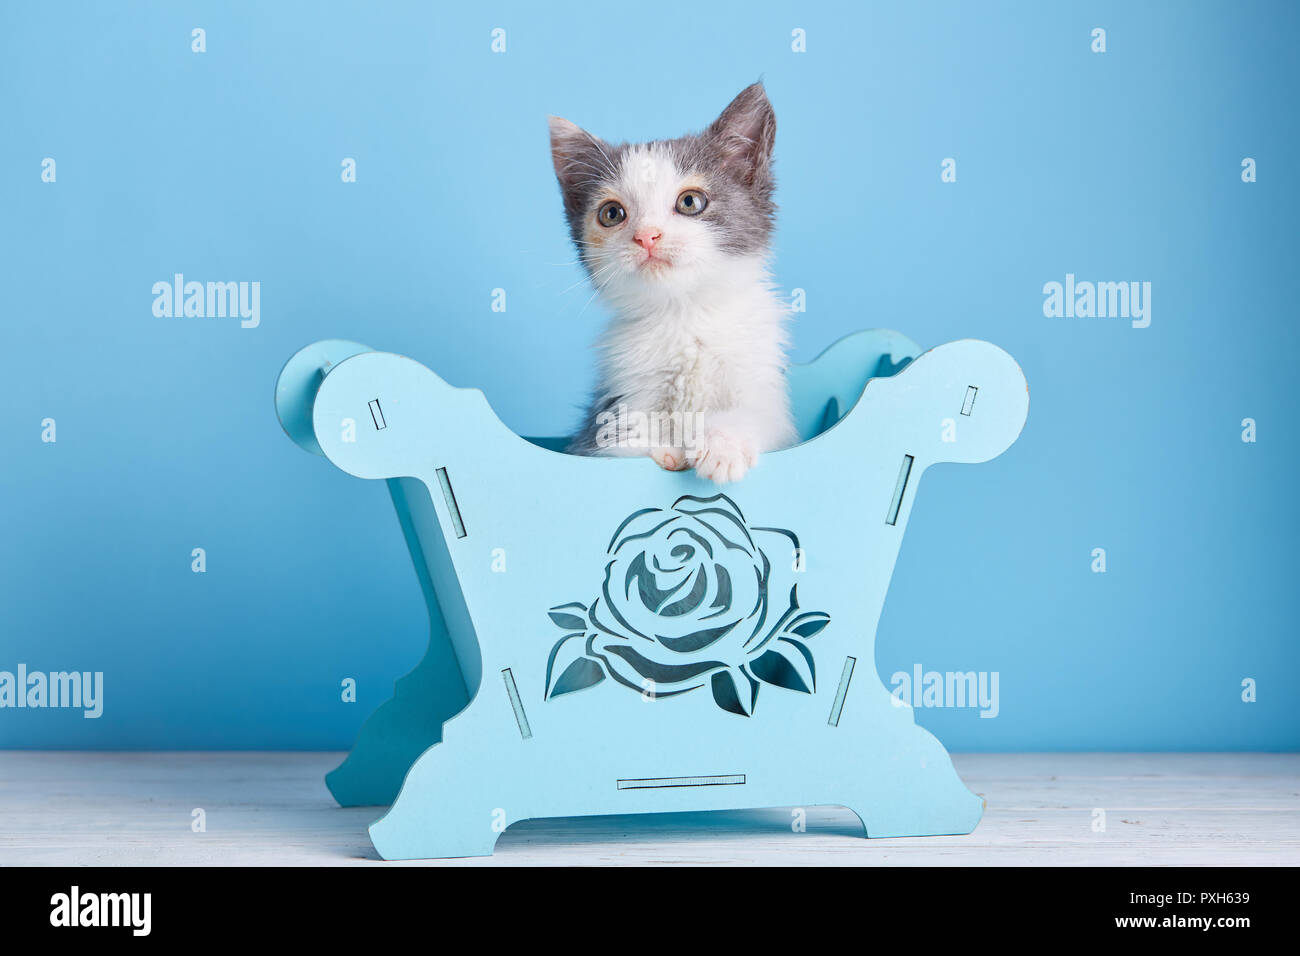 A funny kitten visiting a photographer. On a blue background. Stock Photo